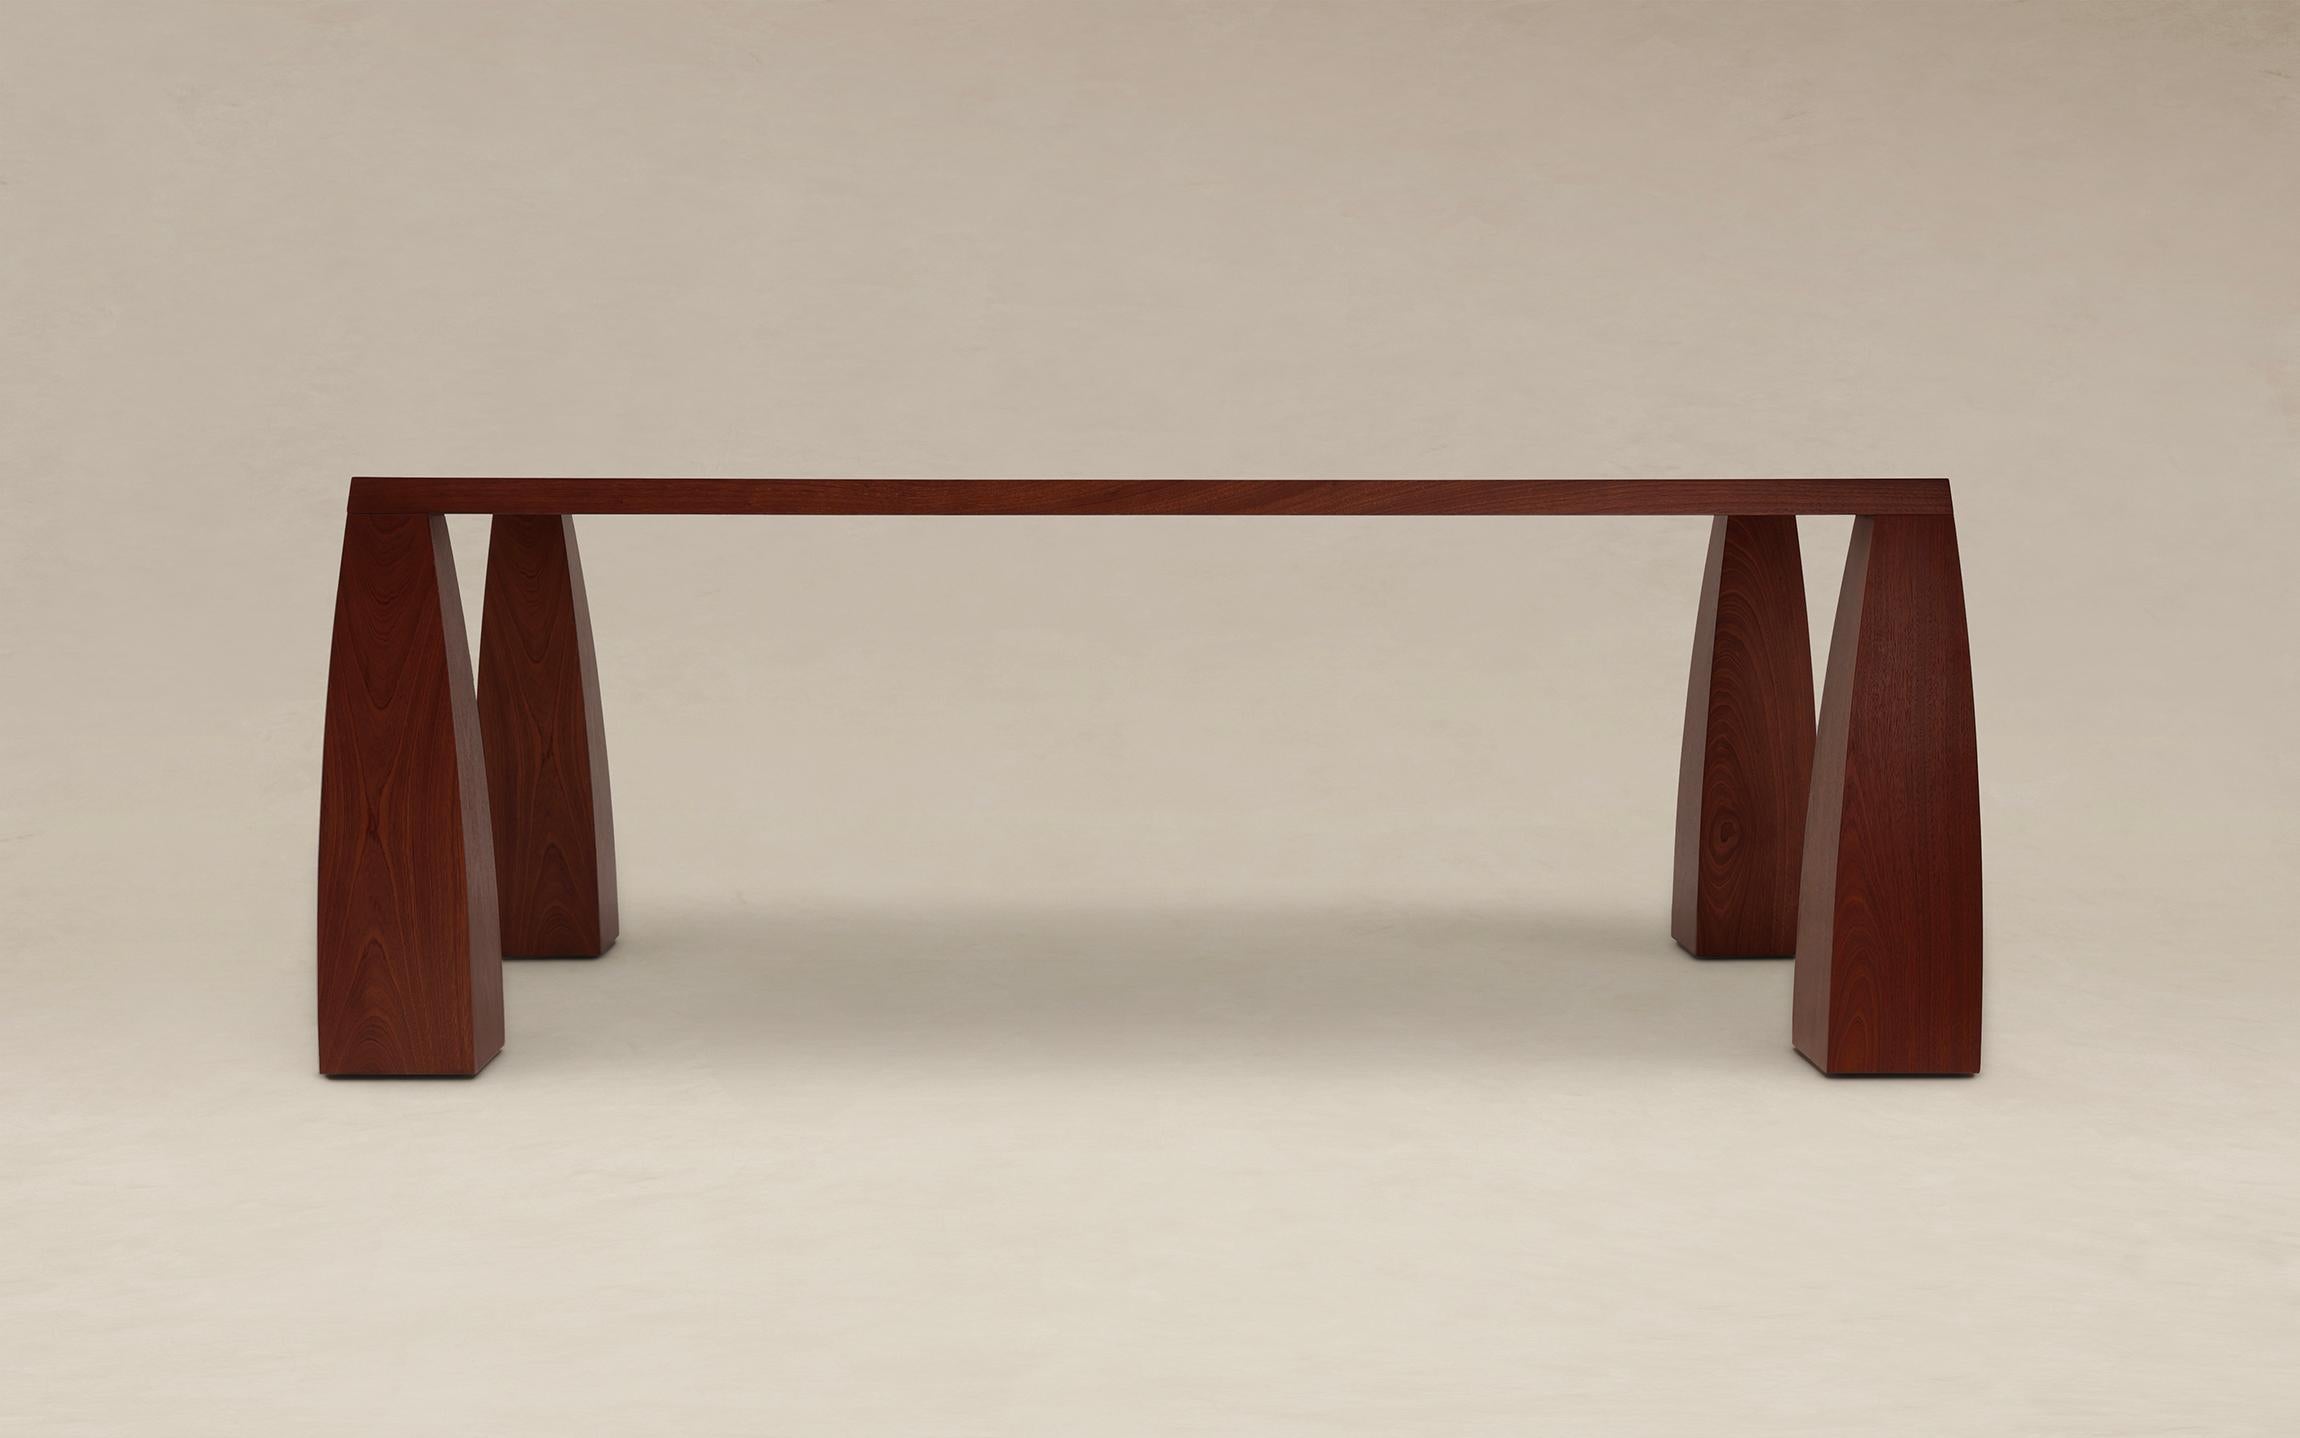 Khram Dining Table by Aède Studios
Dimensions: D 100 x W 200 x H 75 cm. 
Materials: Figured mahogany. 

Available in figured mahogany or oak. Custom materials are available on demand. Please contact us. 

Aède is an interdisciplinary design studio